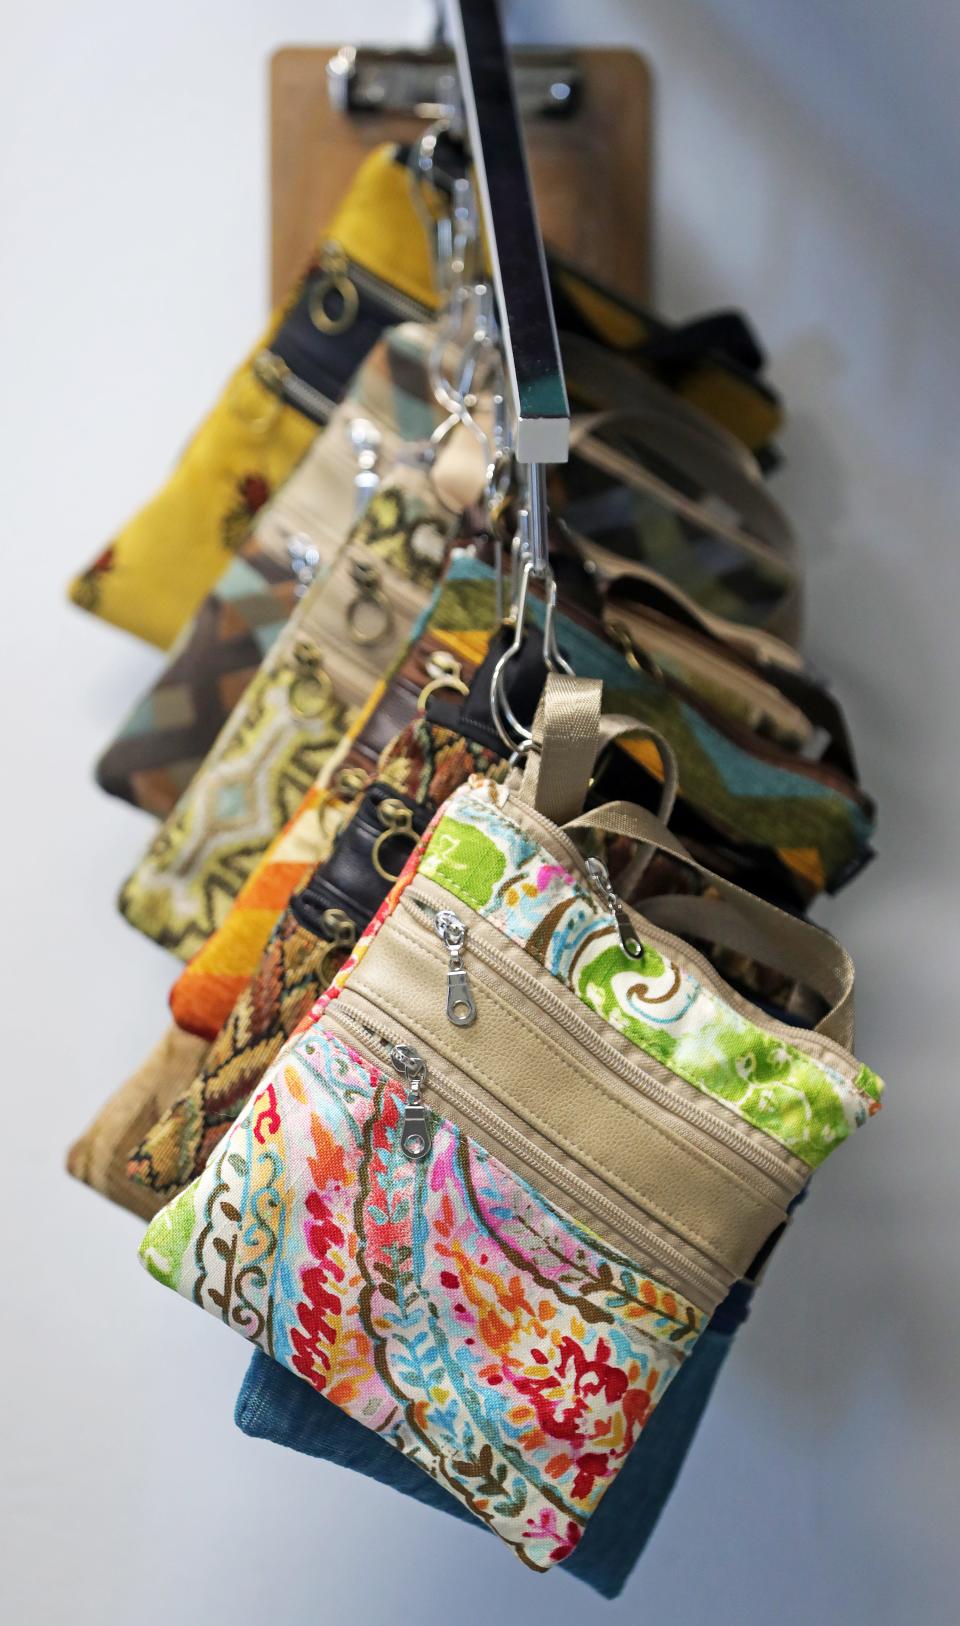 A selection of handbags made by Jennifer Couch, owner of JENCI, a recently opened storefront at 159 Main.